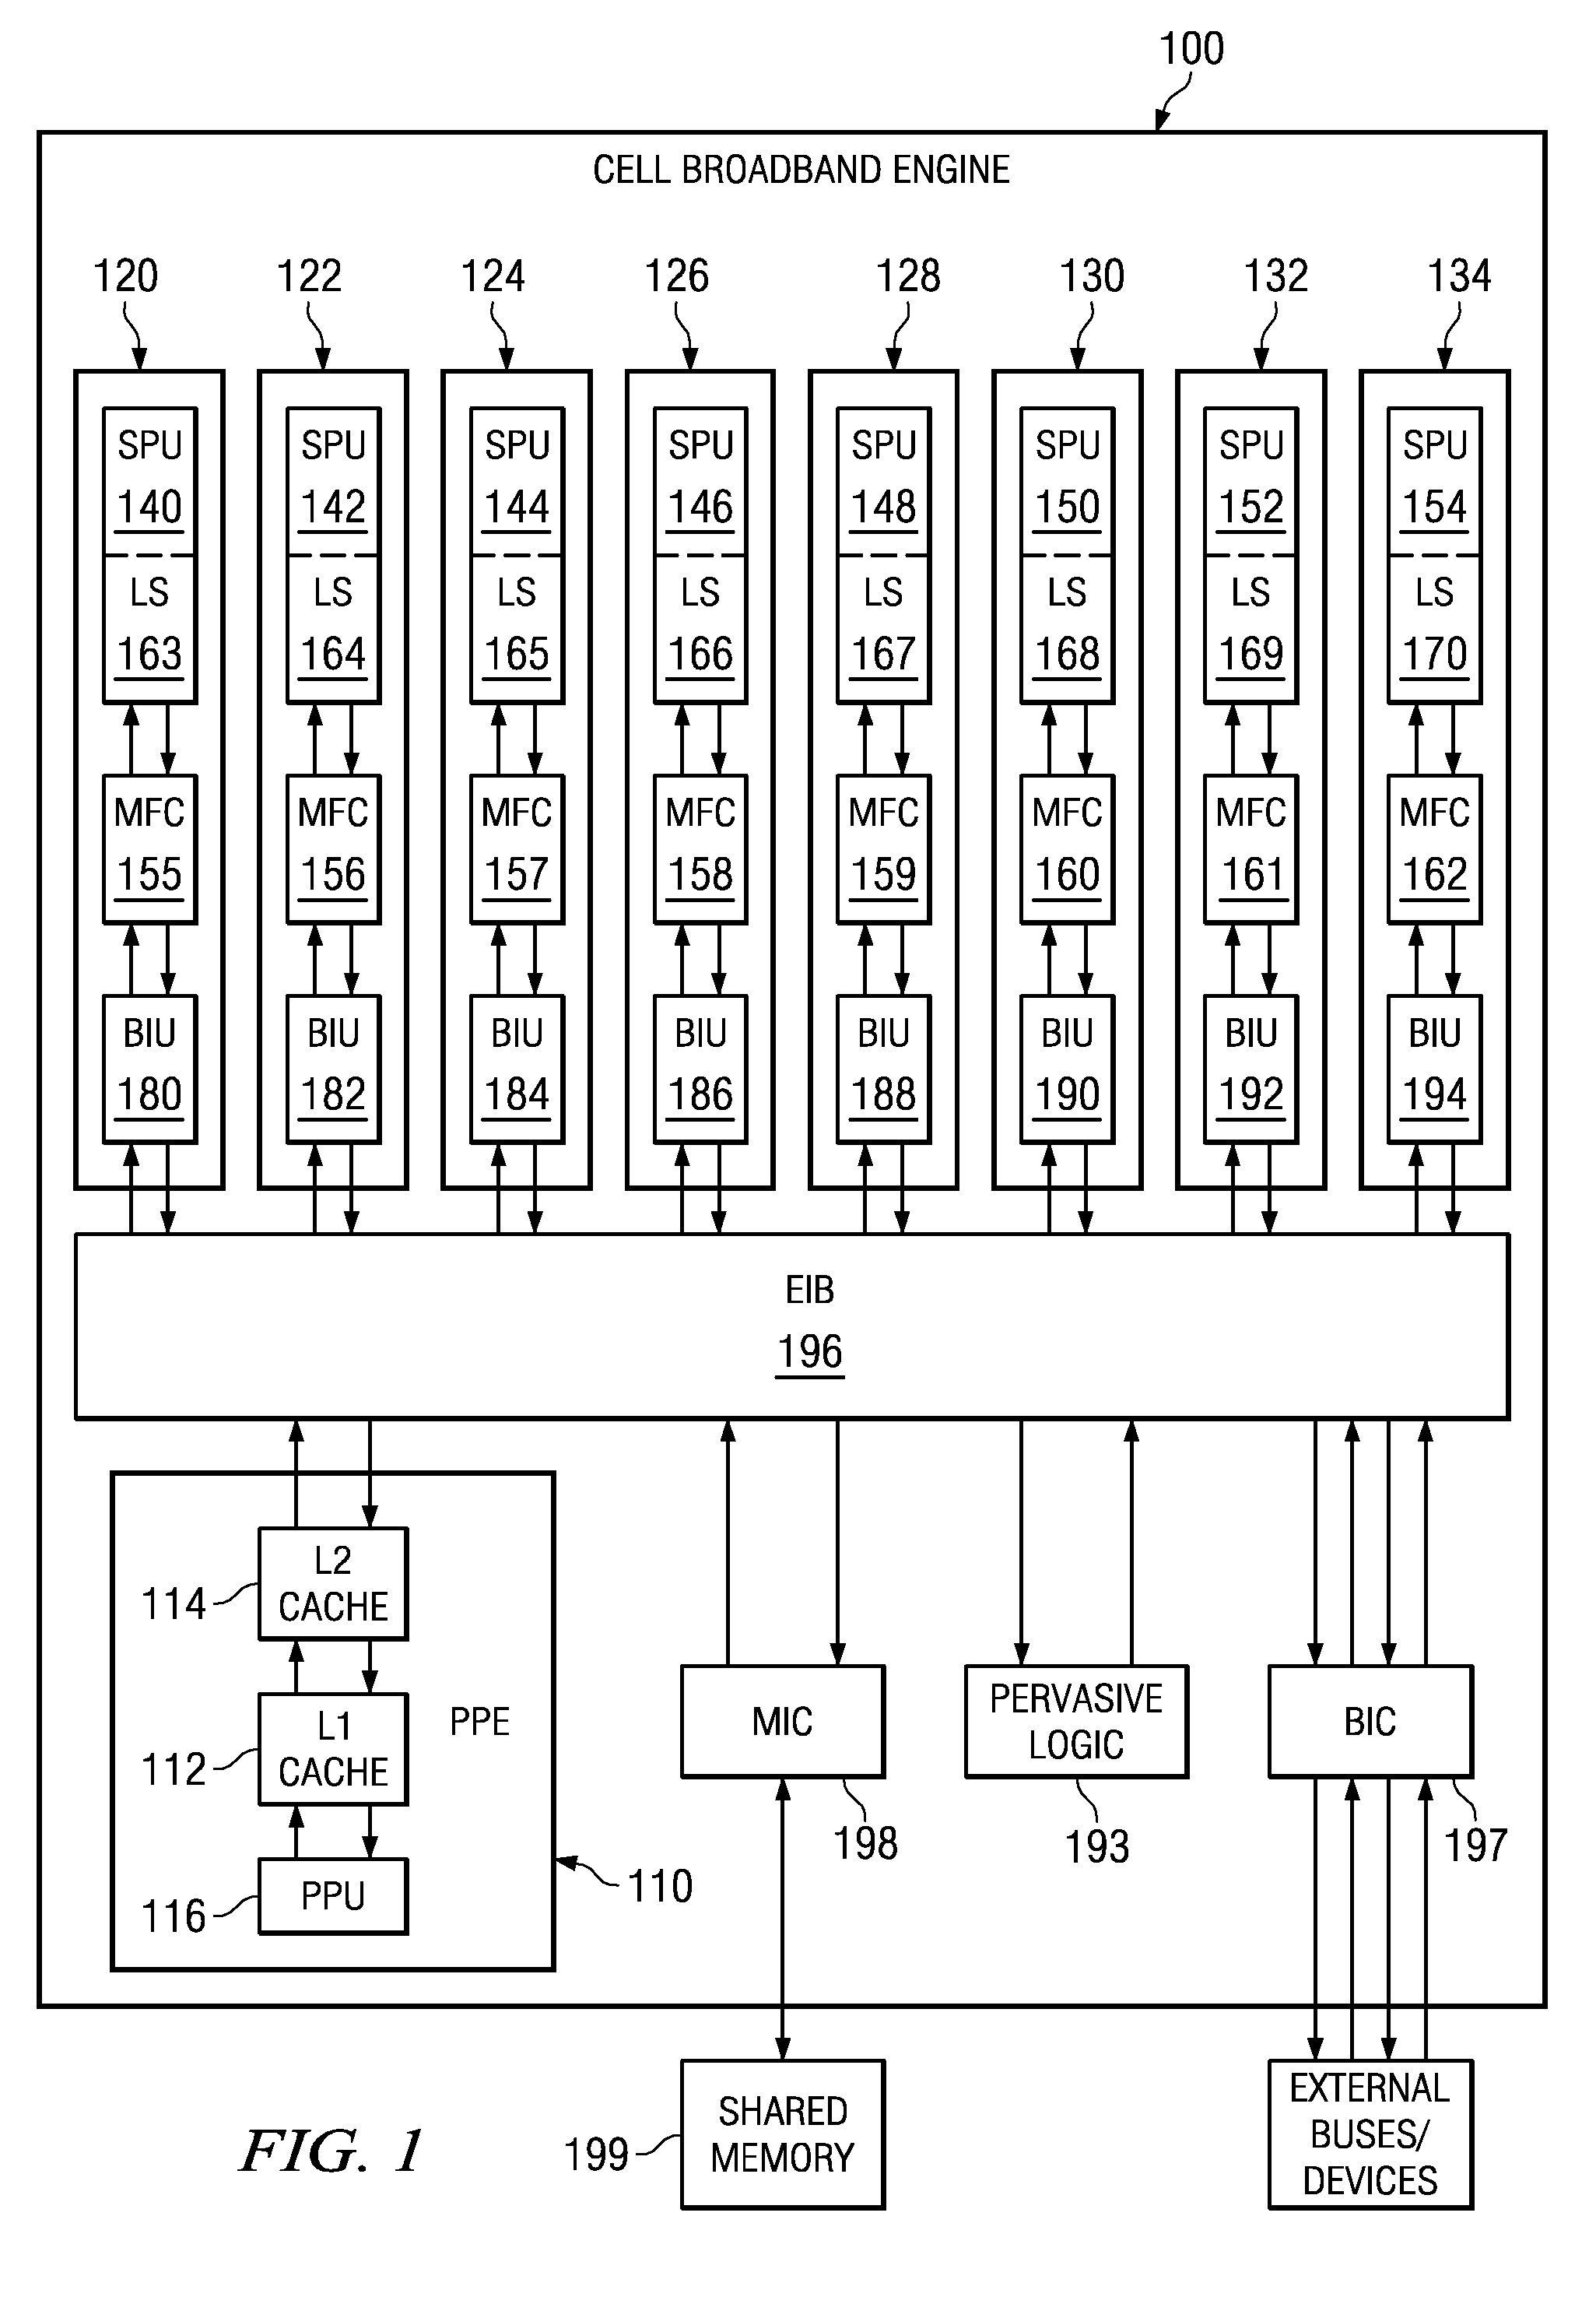 System and Method for Masking a Boot Sequence by Providing a Dummy Processor